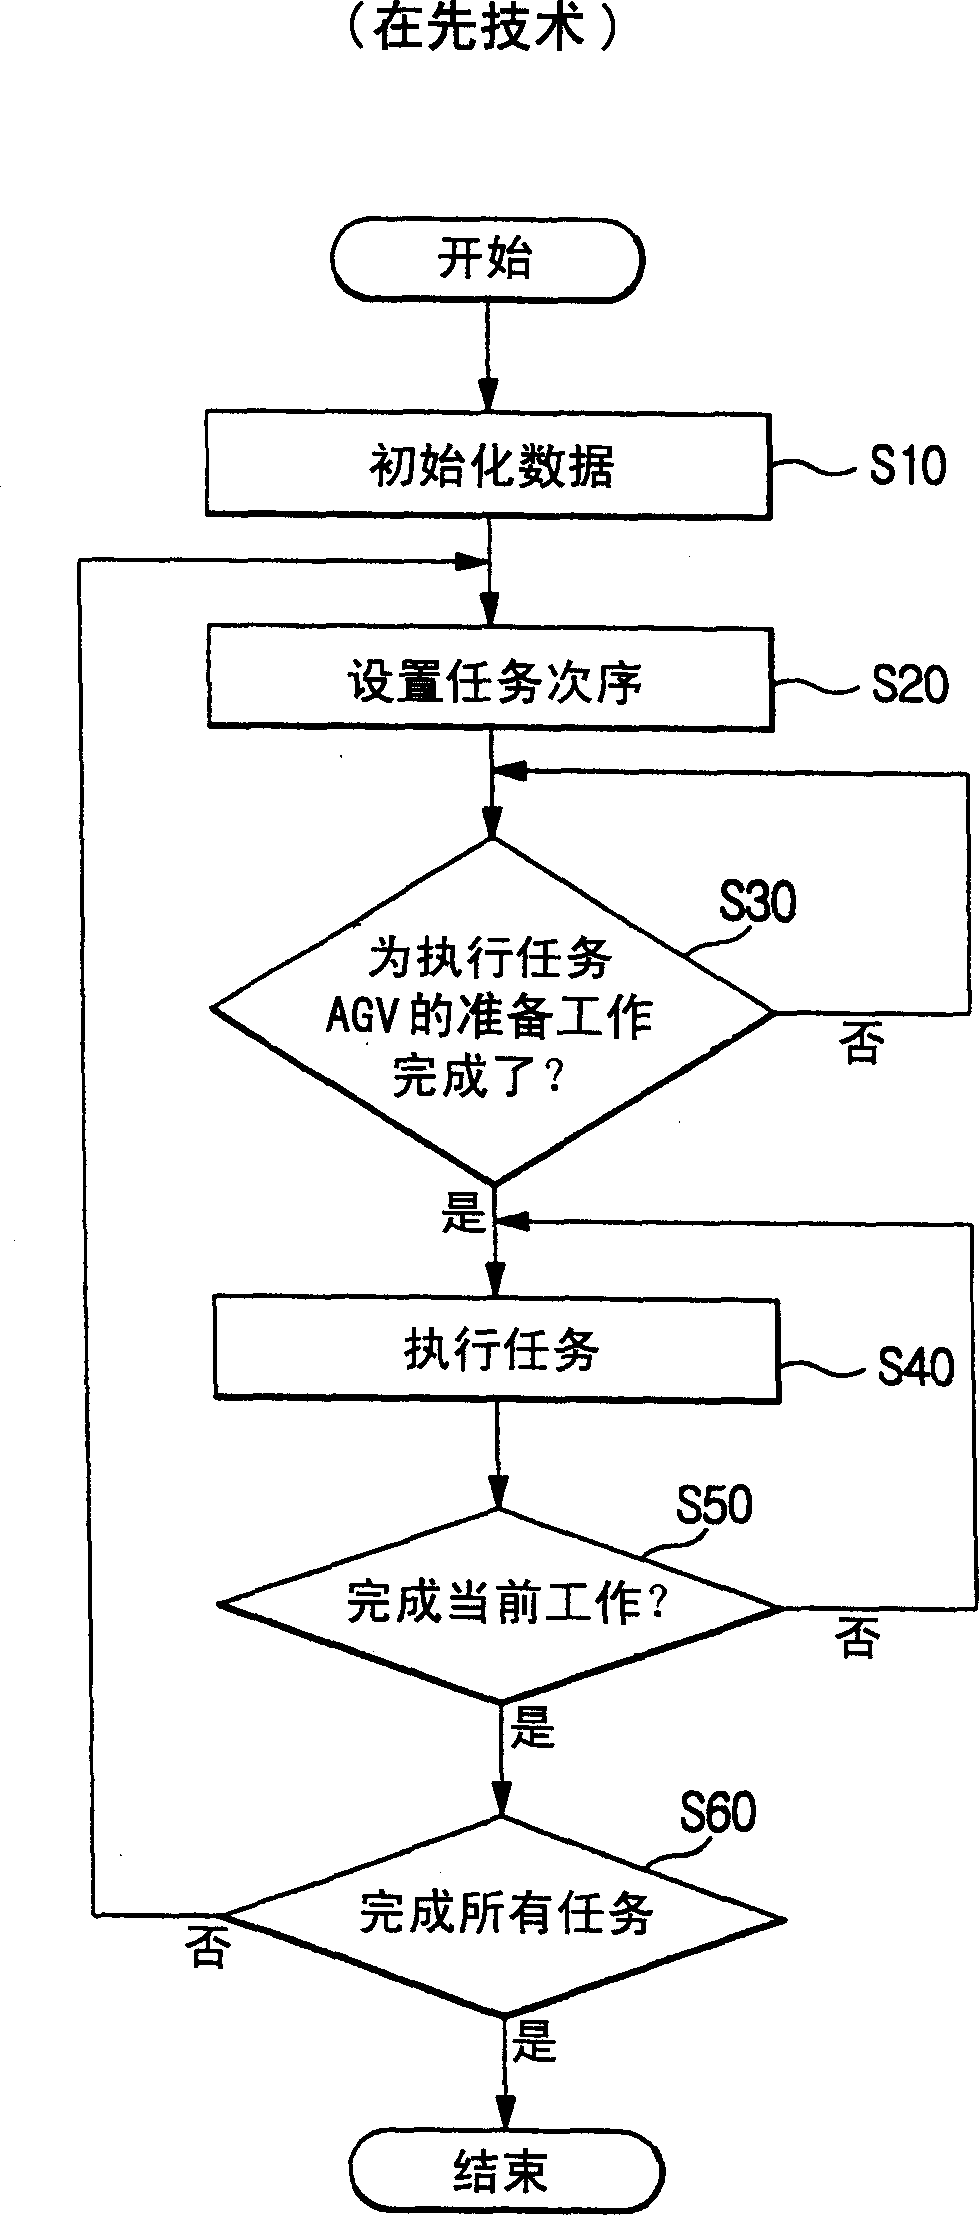 Method for controlling automatically led traffic tools system